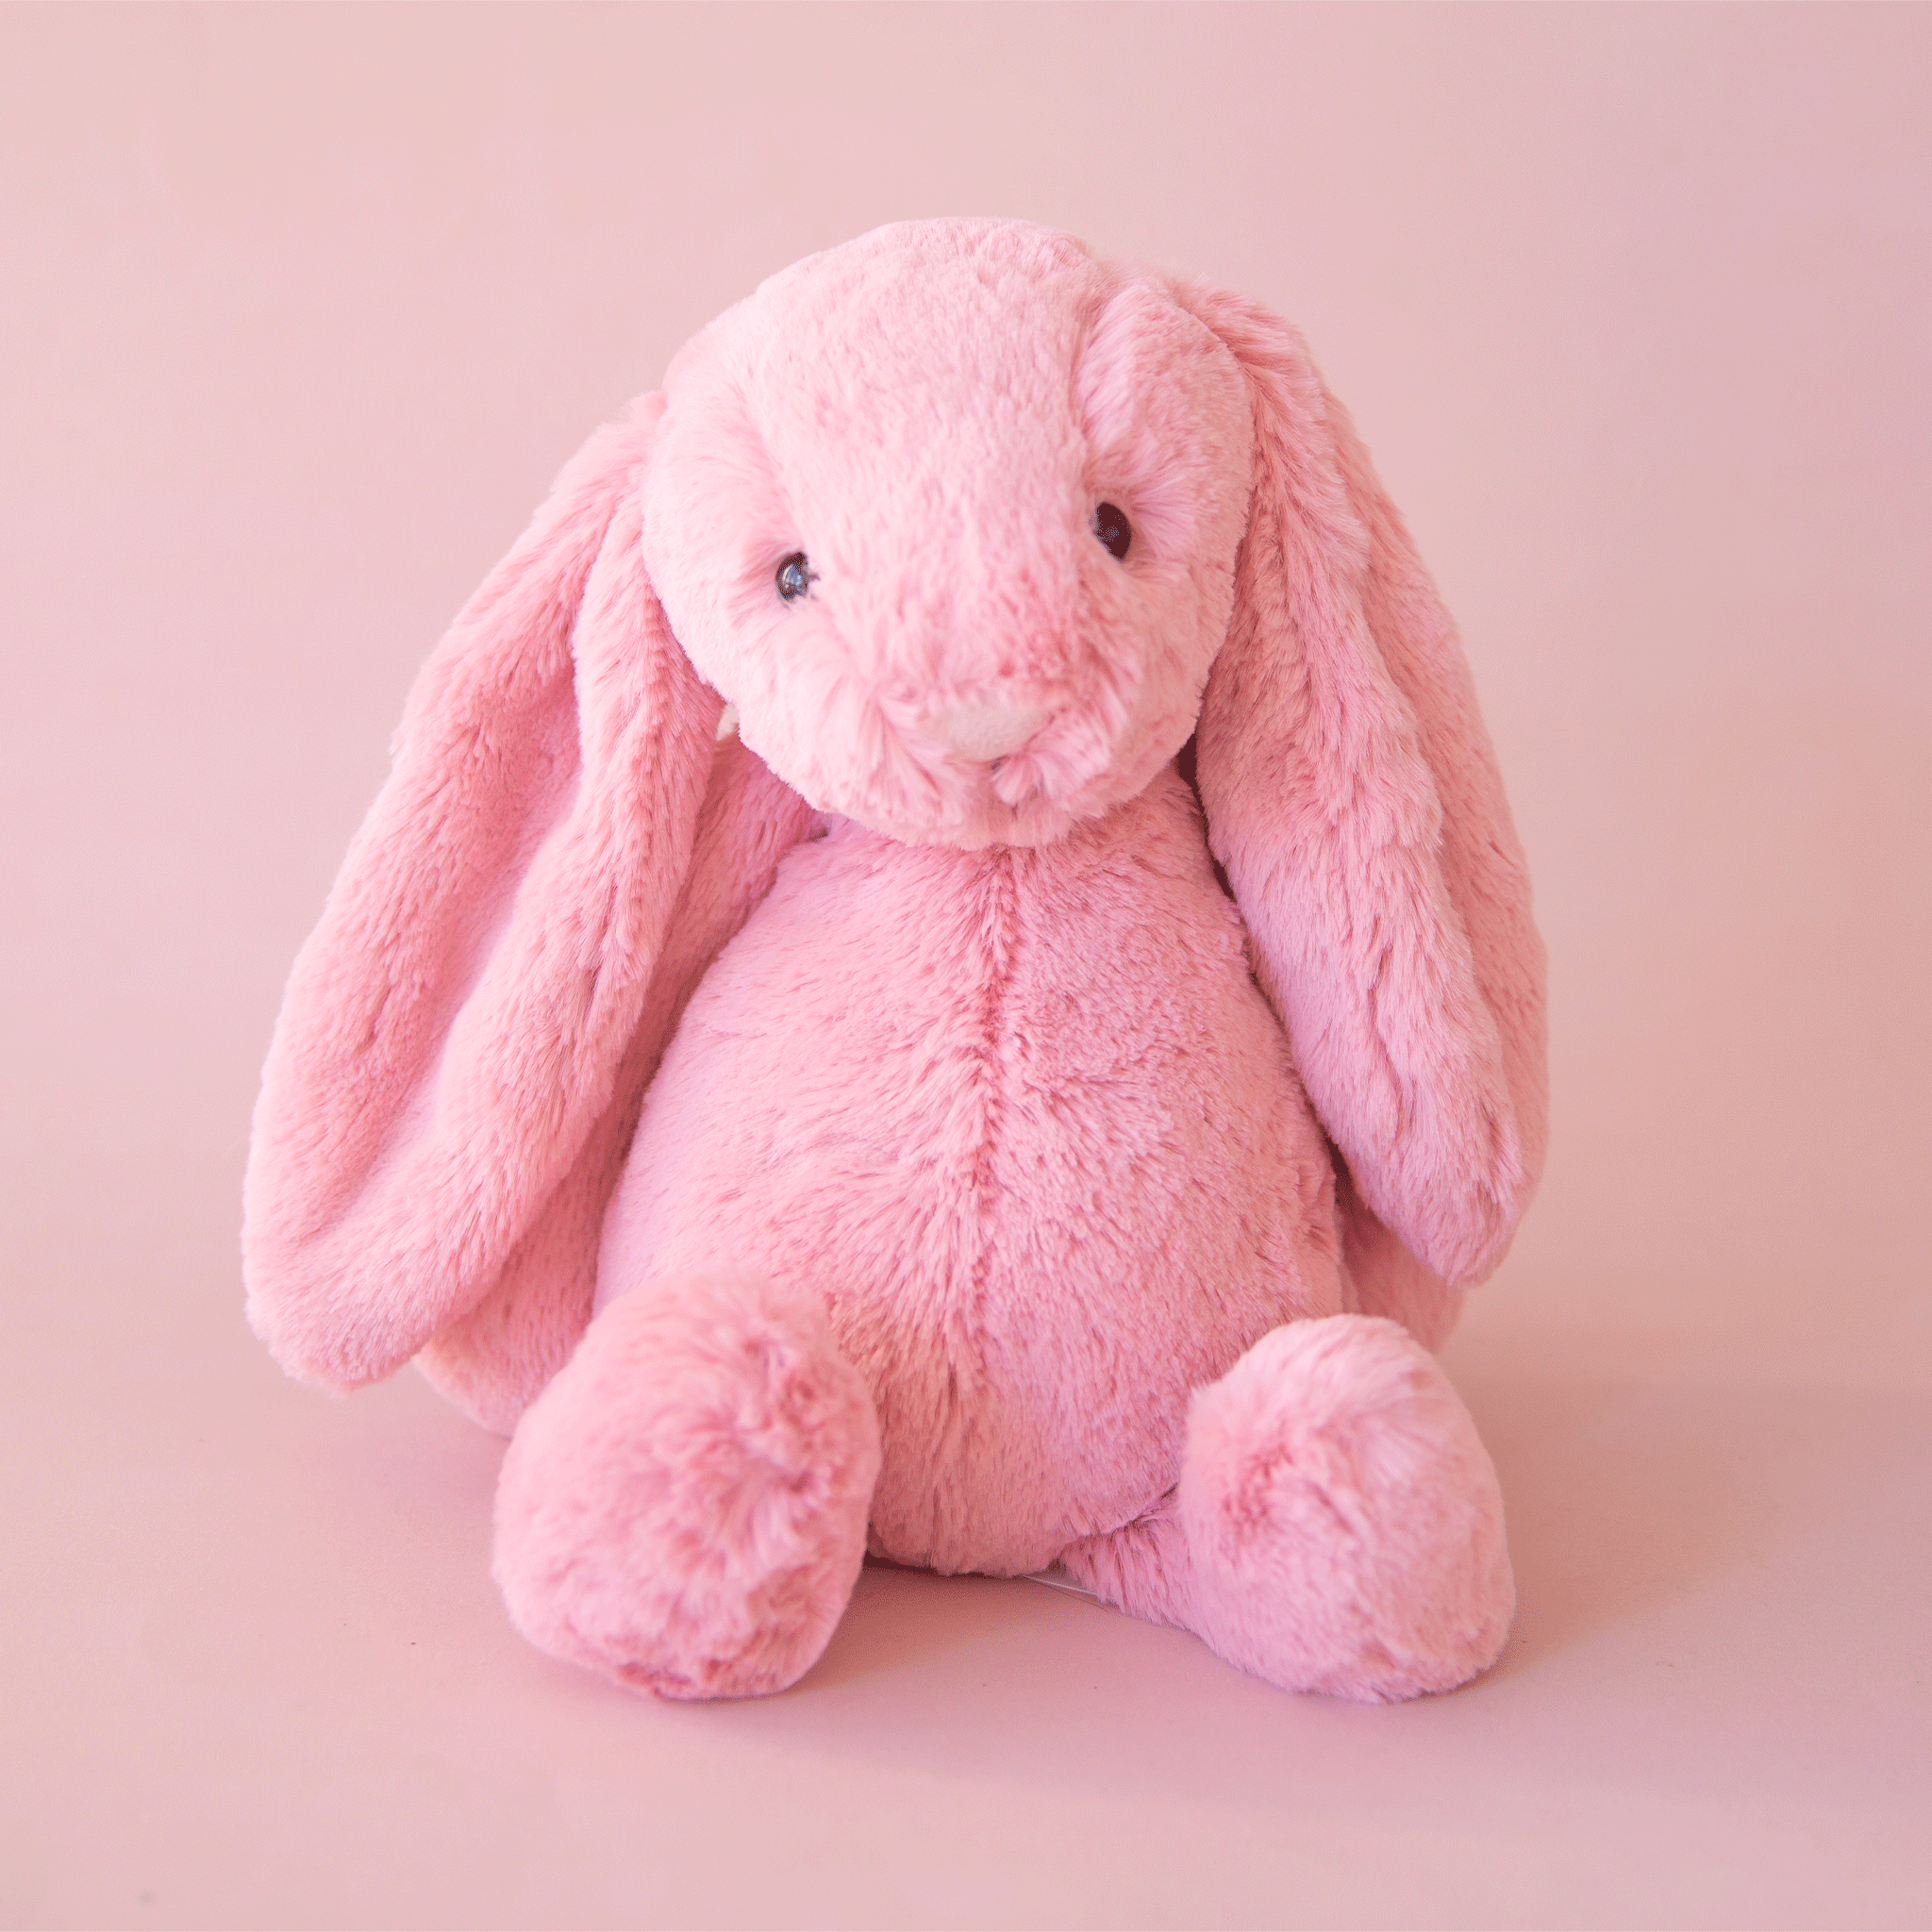 A fuzzy pink bunny stuffed animal with long floppy ears, a light pink nose and black eyes.